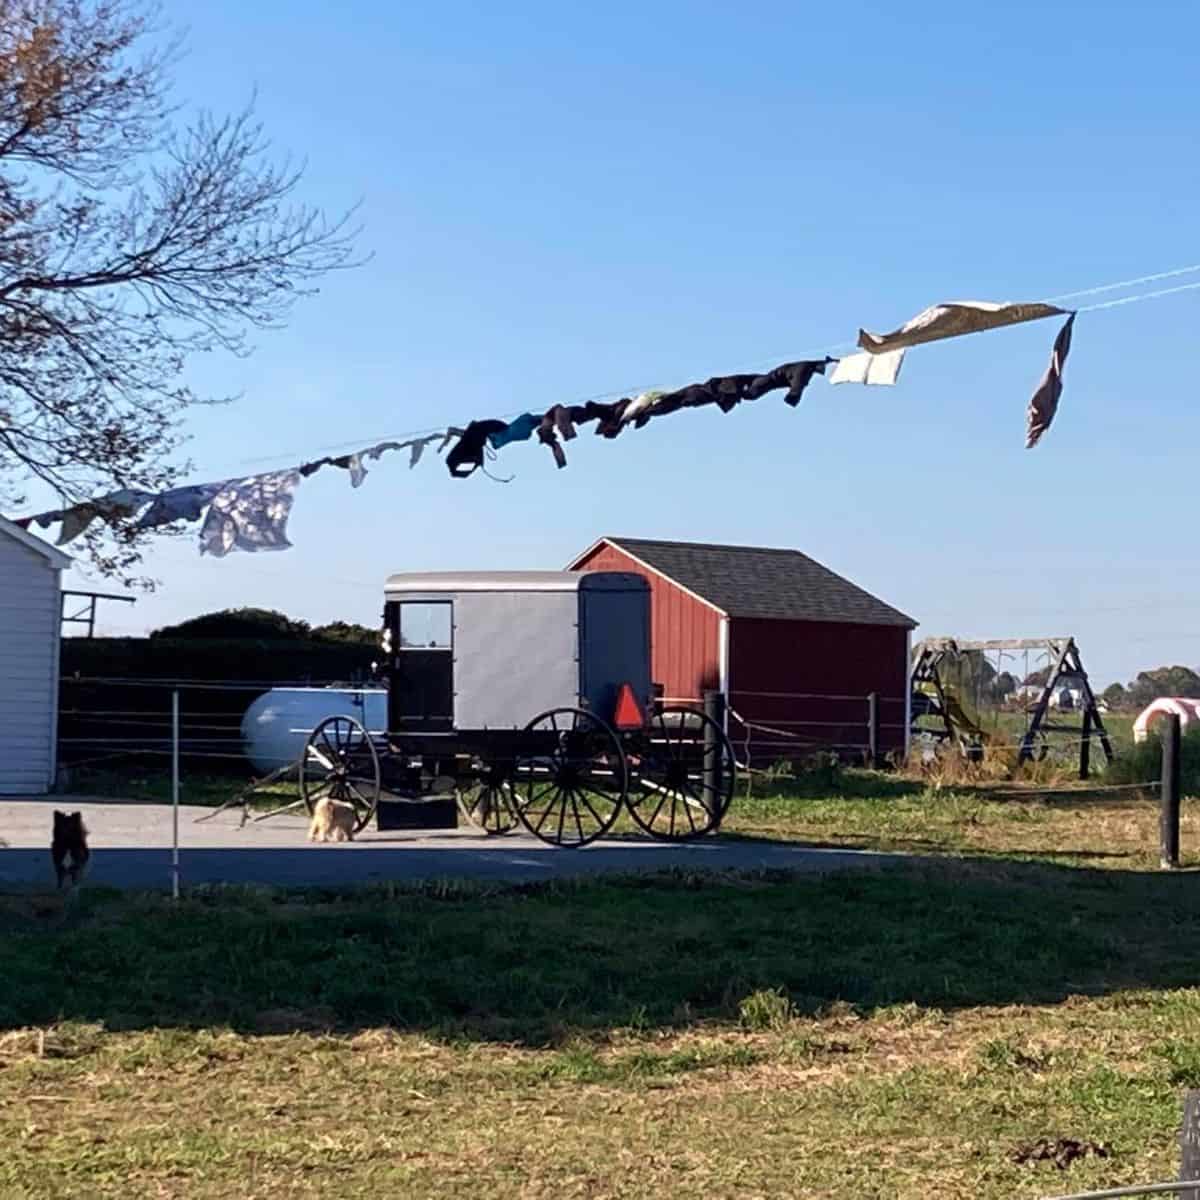 An Amish buggy in the yard, and clothes on the line. The question is "Can Amish marry non-Amish?"